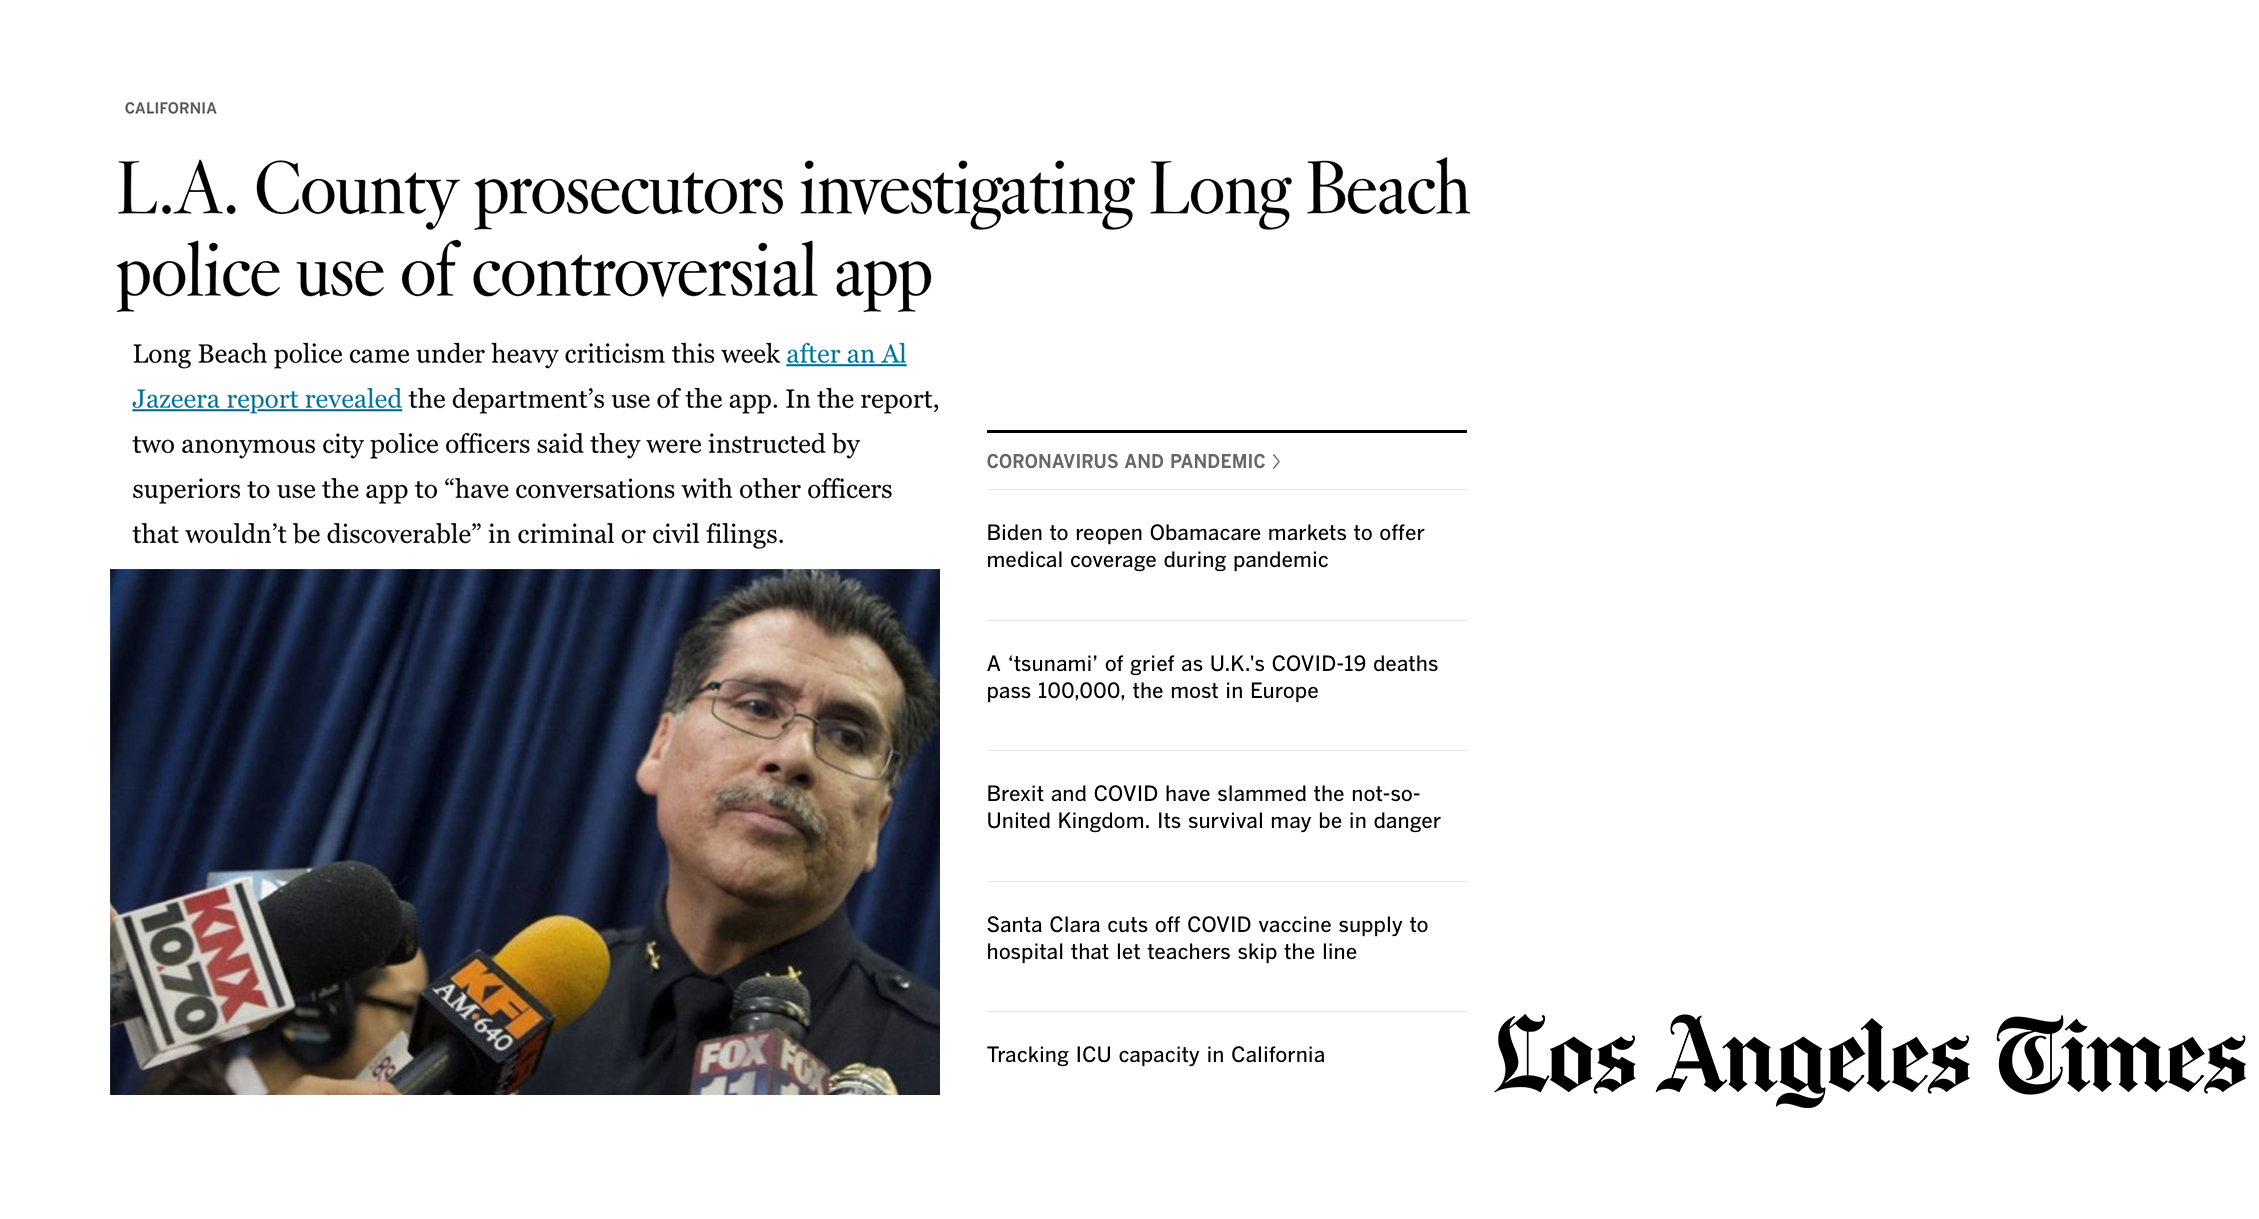 L.A. County prosecutors investigating Long Beach police use of controversial app